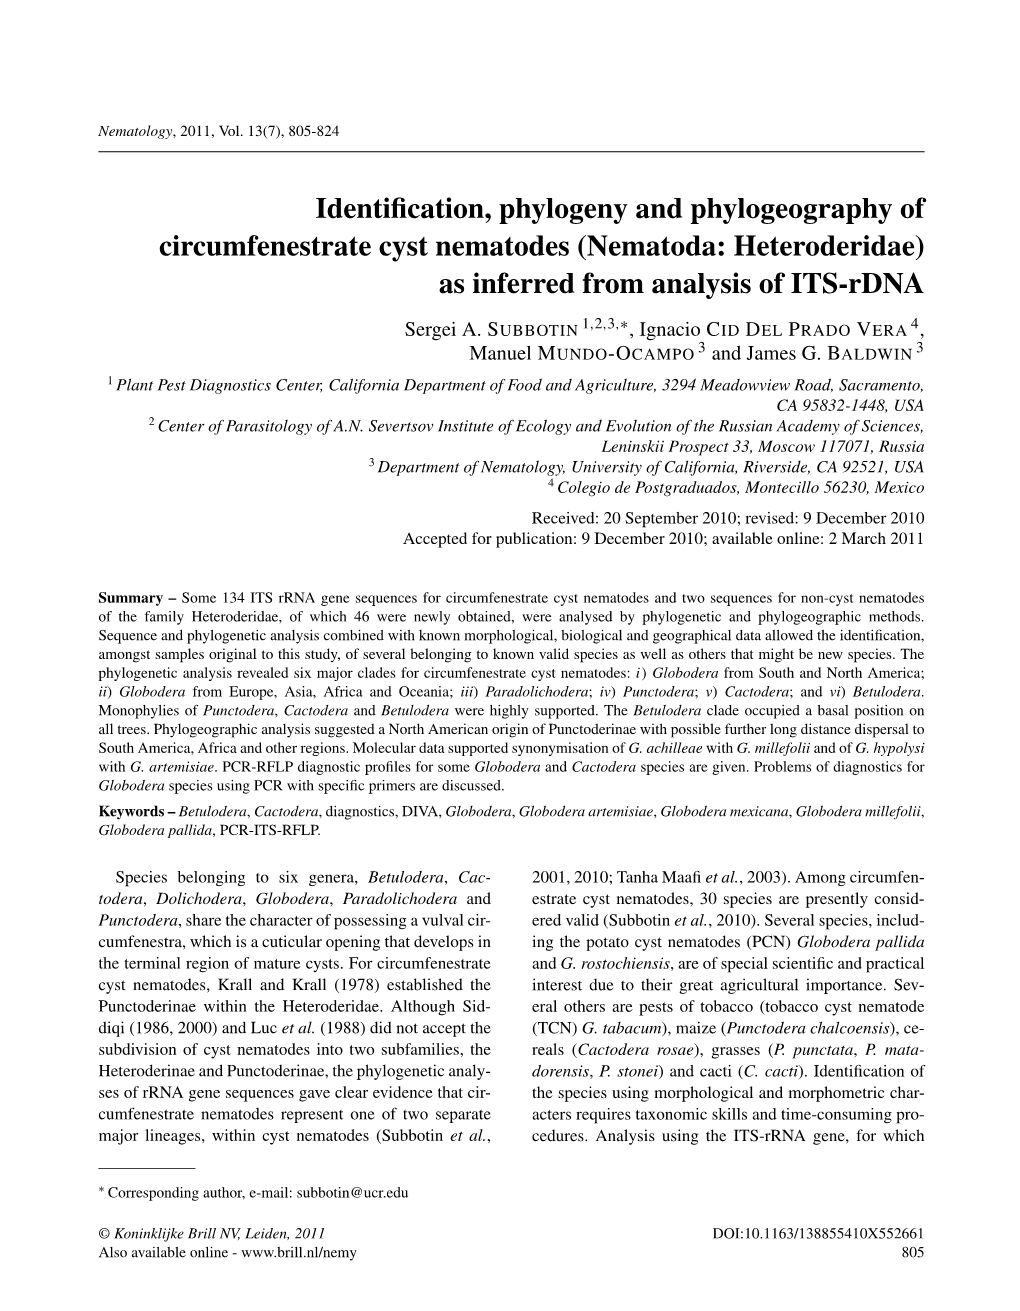 Identification, Phylogeny and Phylogeography of Circumfenestrate